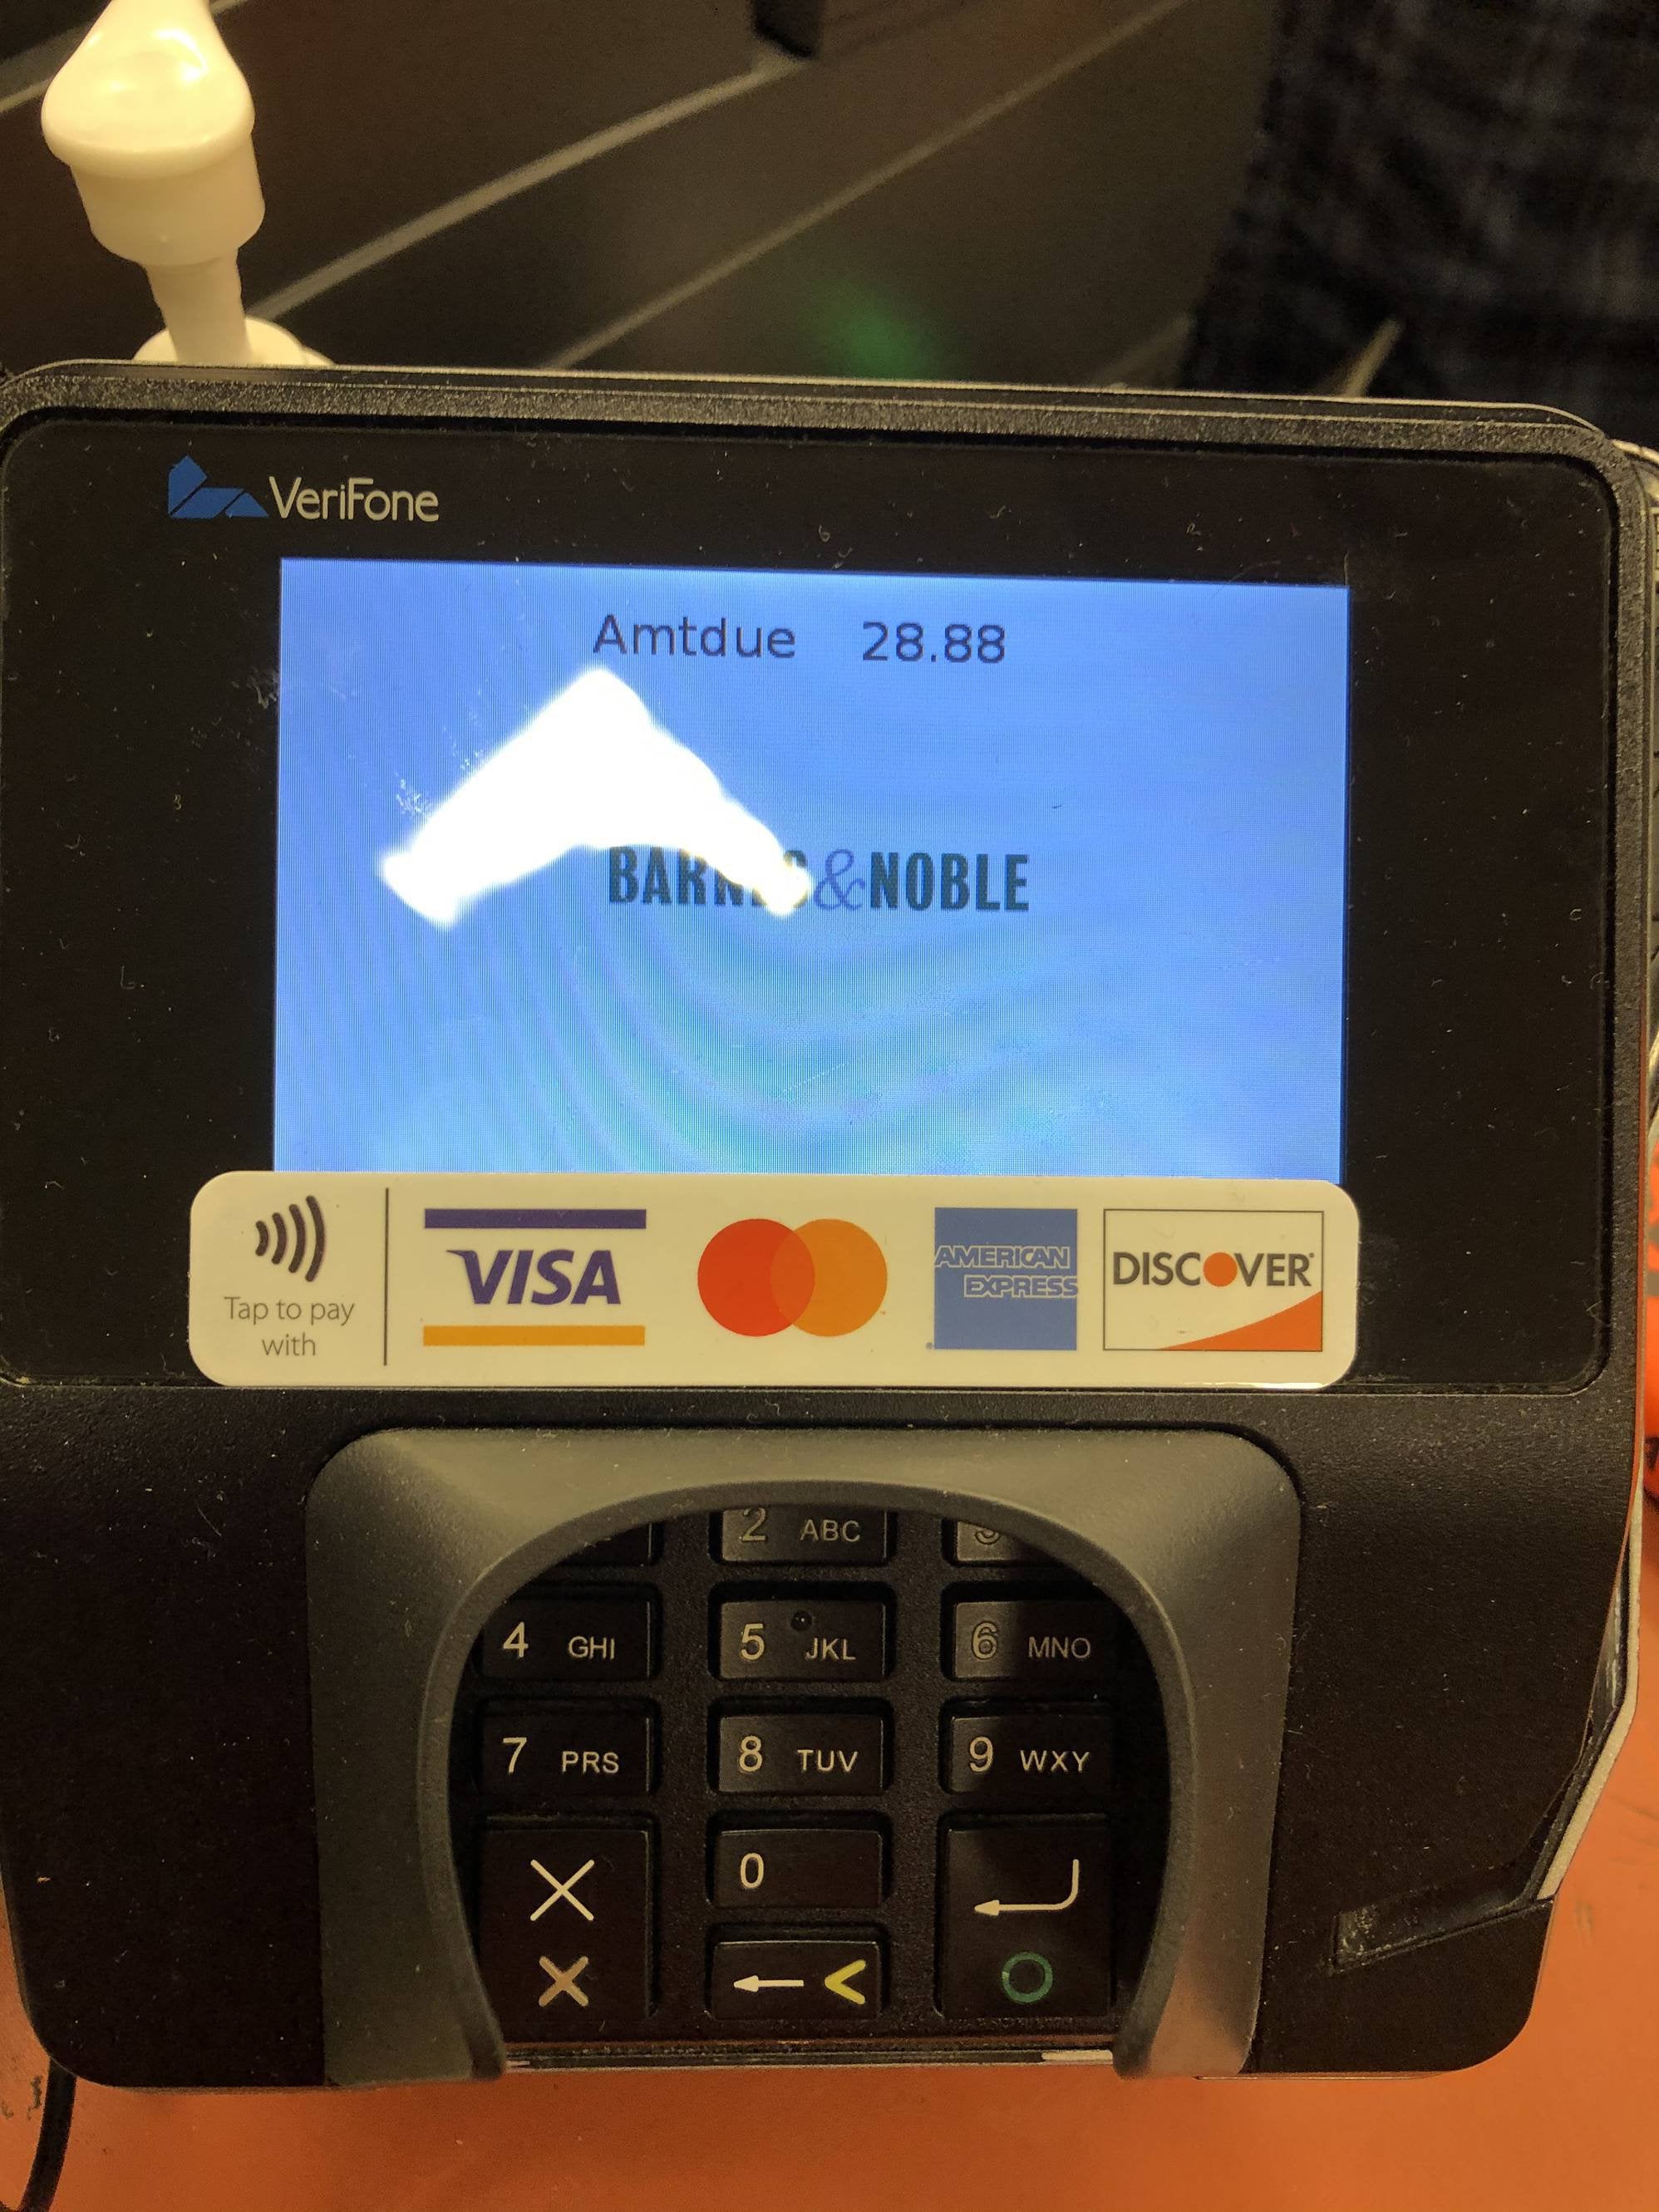 Barnes & Noble accepts contactless payments.